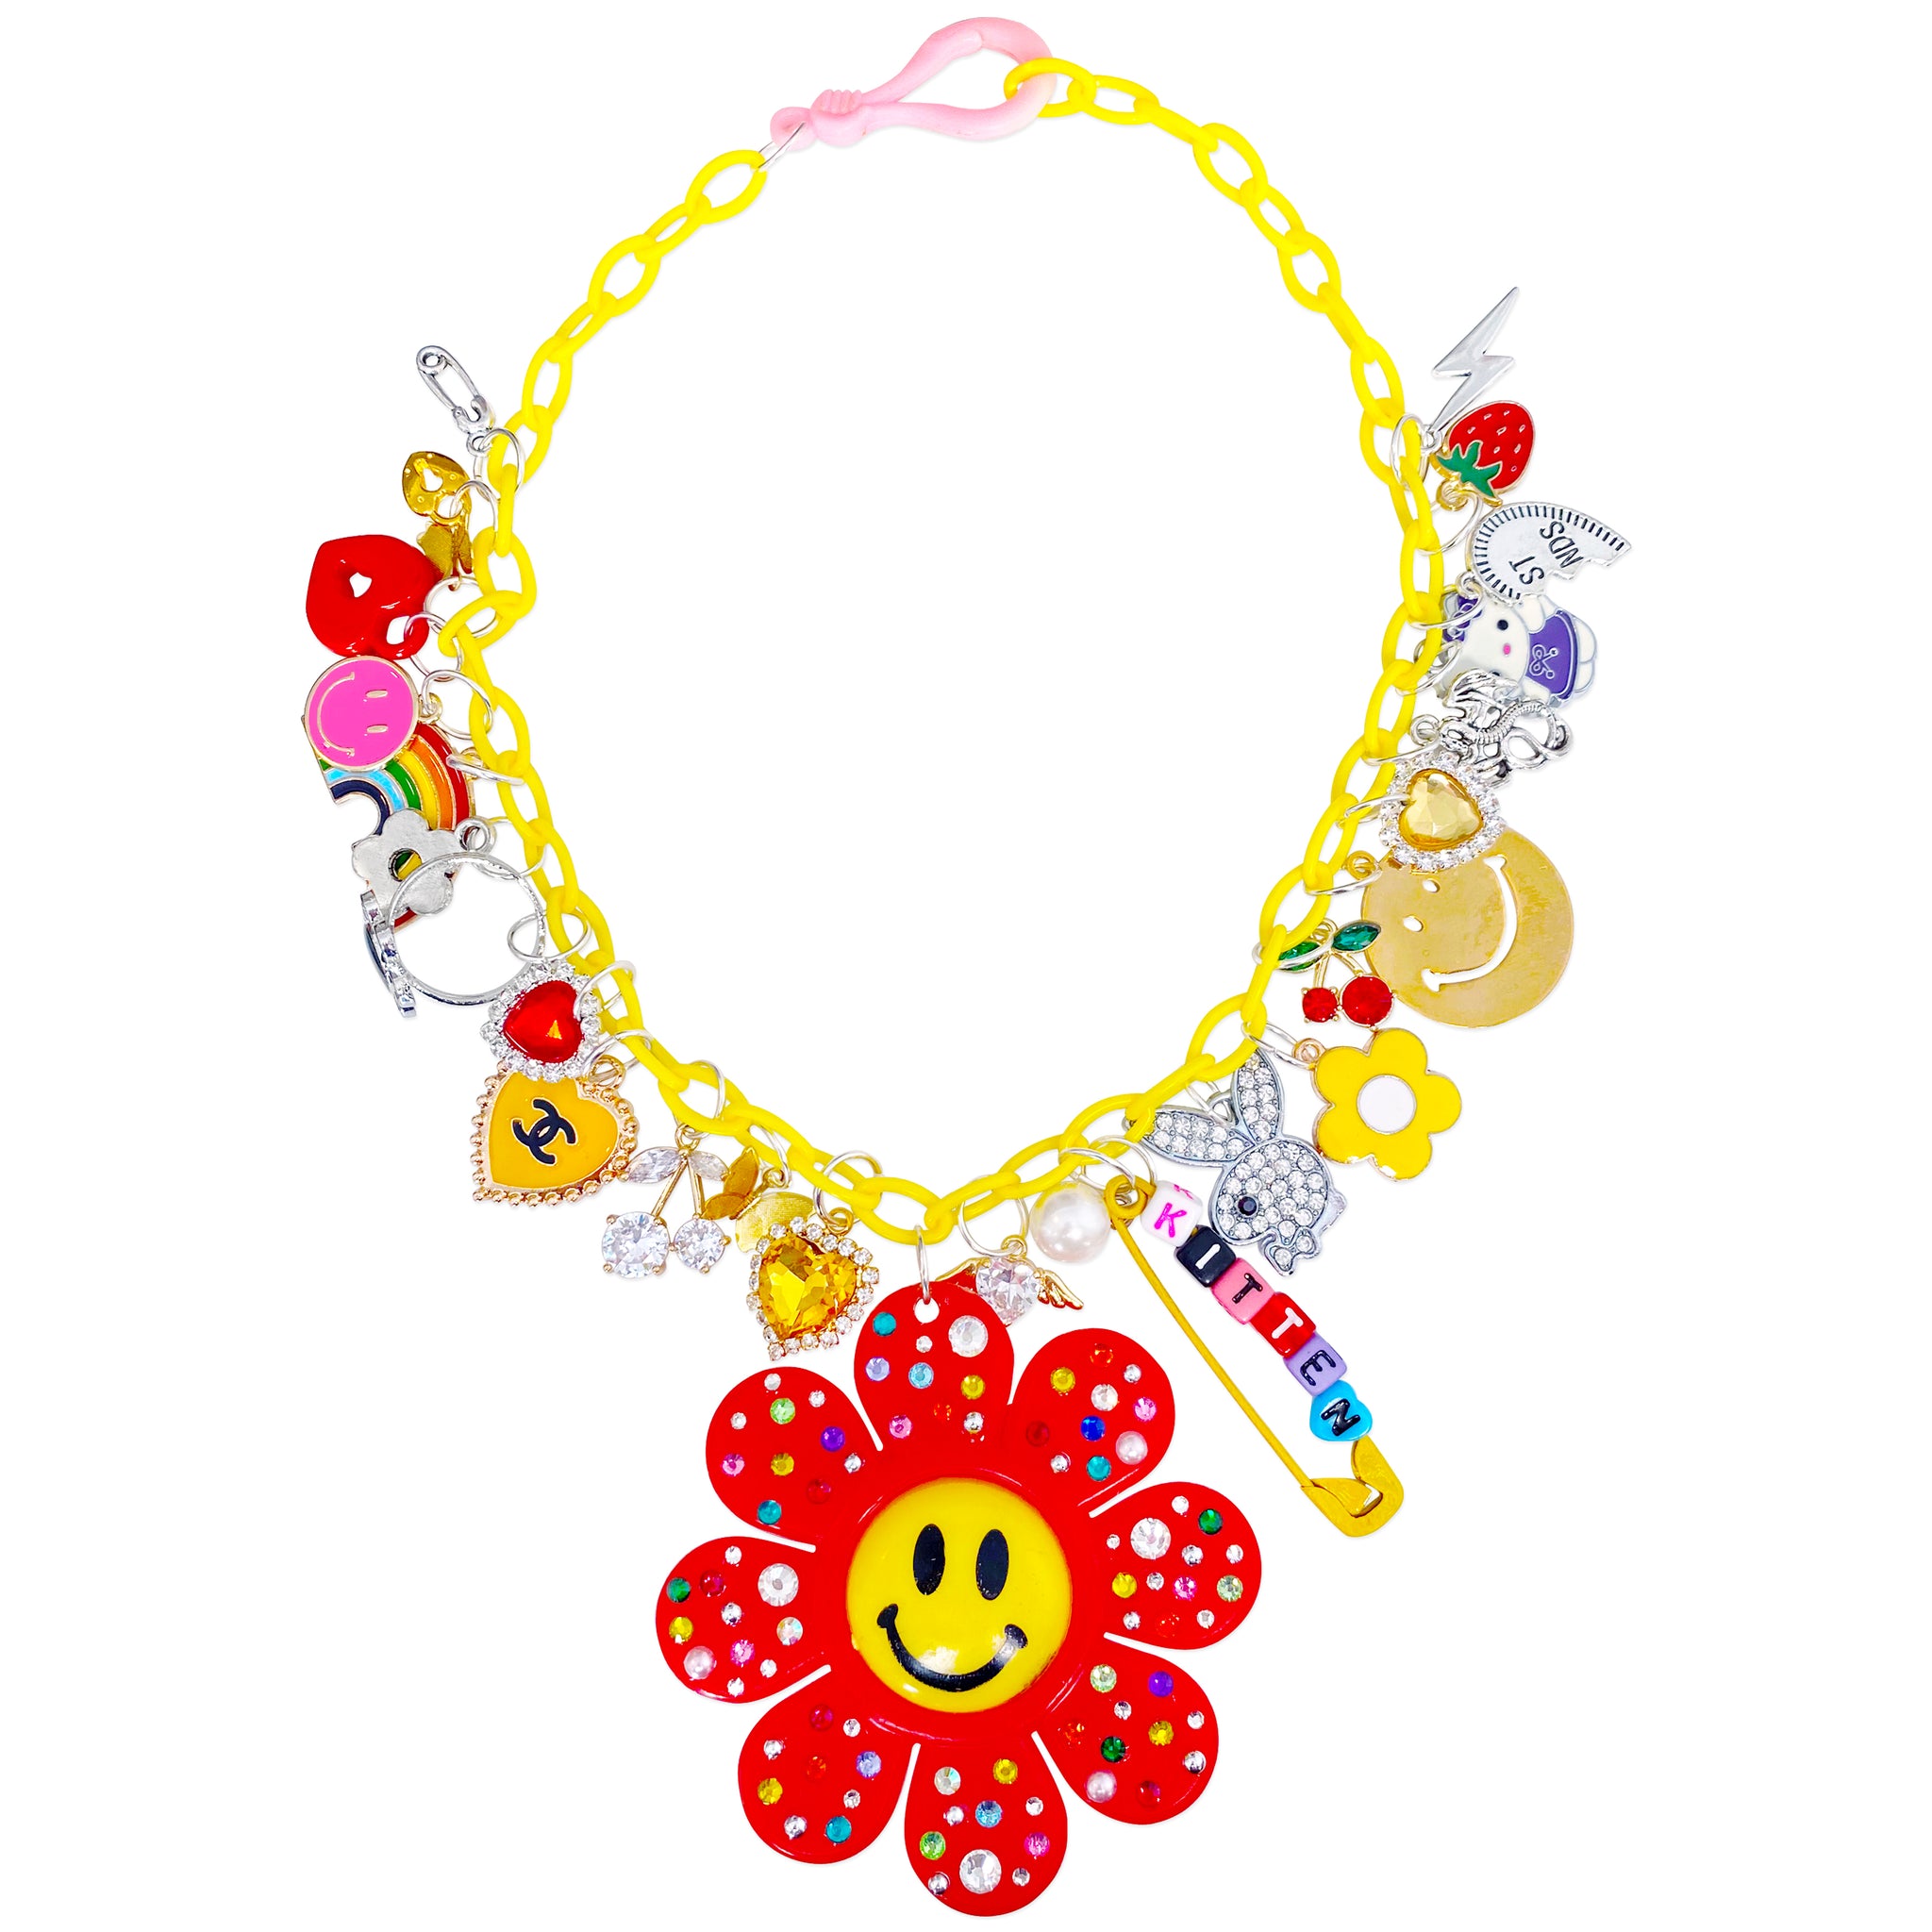 Smiley Flower Power Charm Necklace